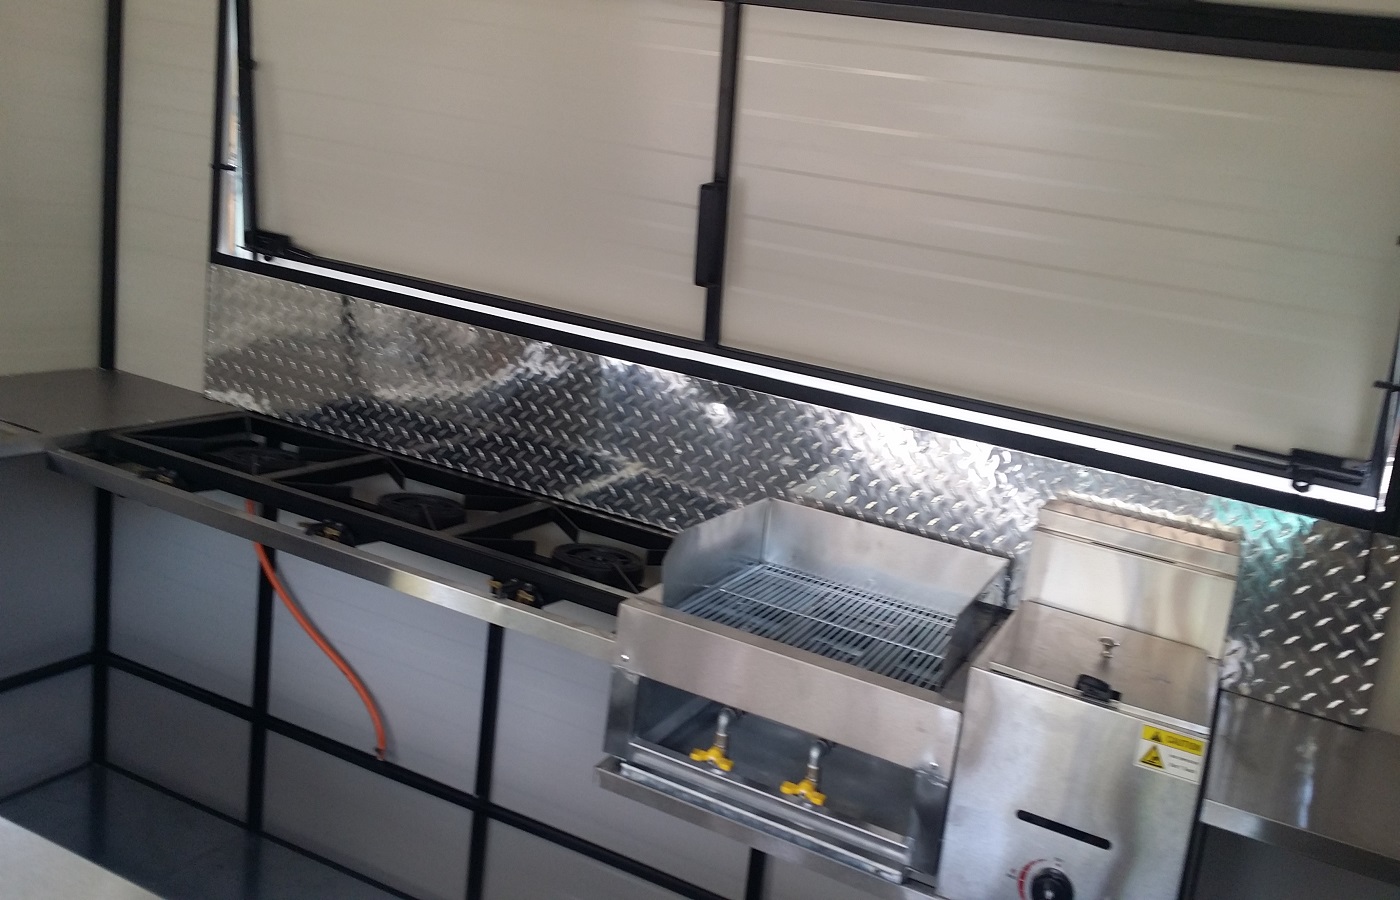 Msf Trailer Manufacturers Mobile Kitchens Mobile Kitchens For Sale Food Trailers Food Trailers For Sale Trailers For Sale Mobile Toilets Mobile Freezers Chicken Trailers Luggage Trailers Cold Rooms And Livestock Trailers